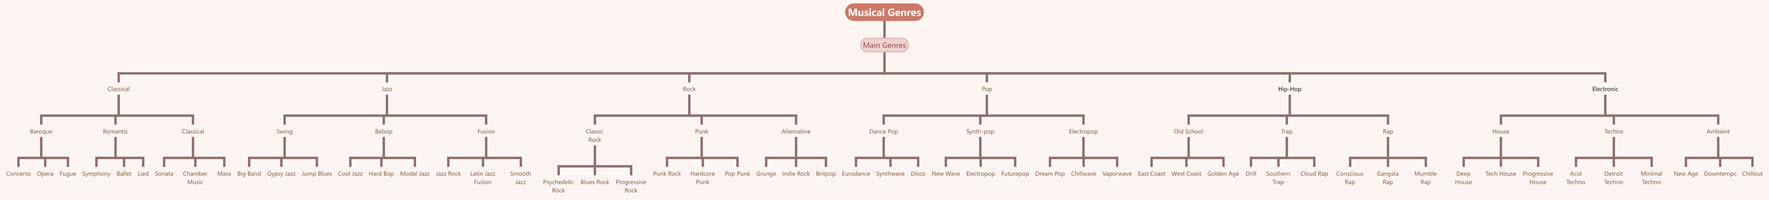 Tree Chart of Musical Genres